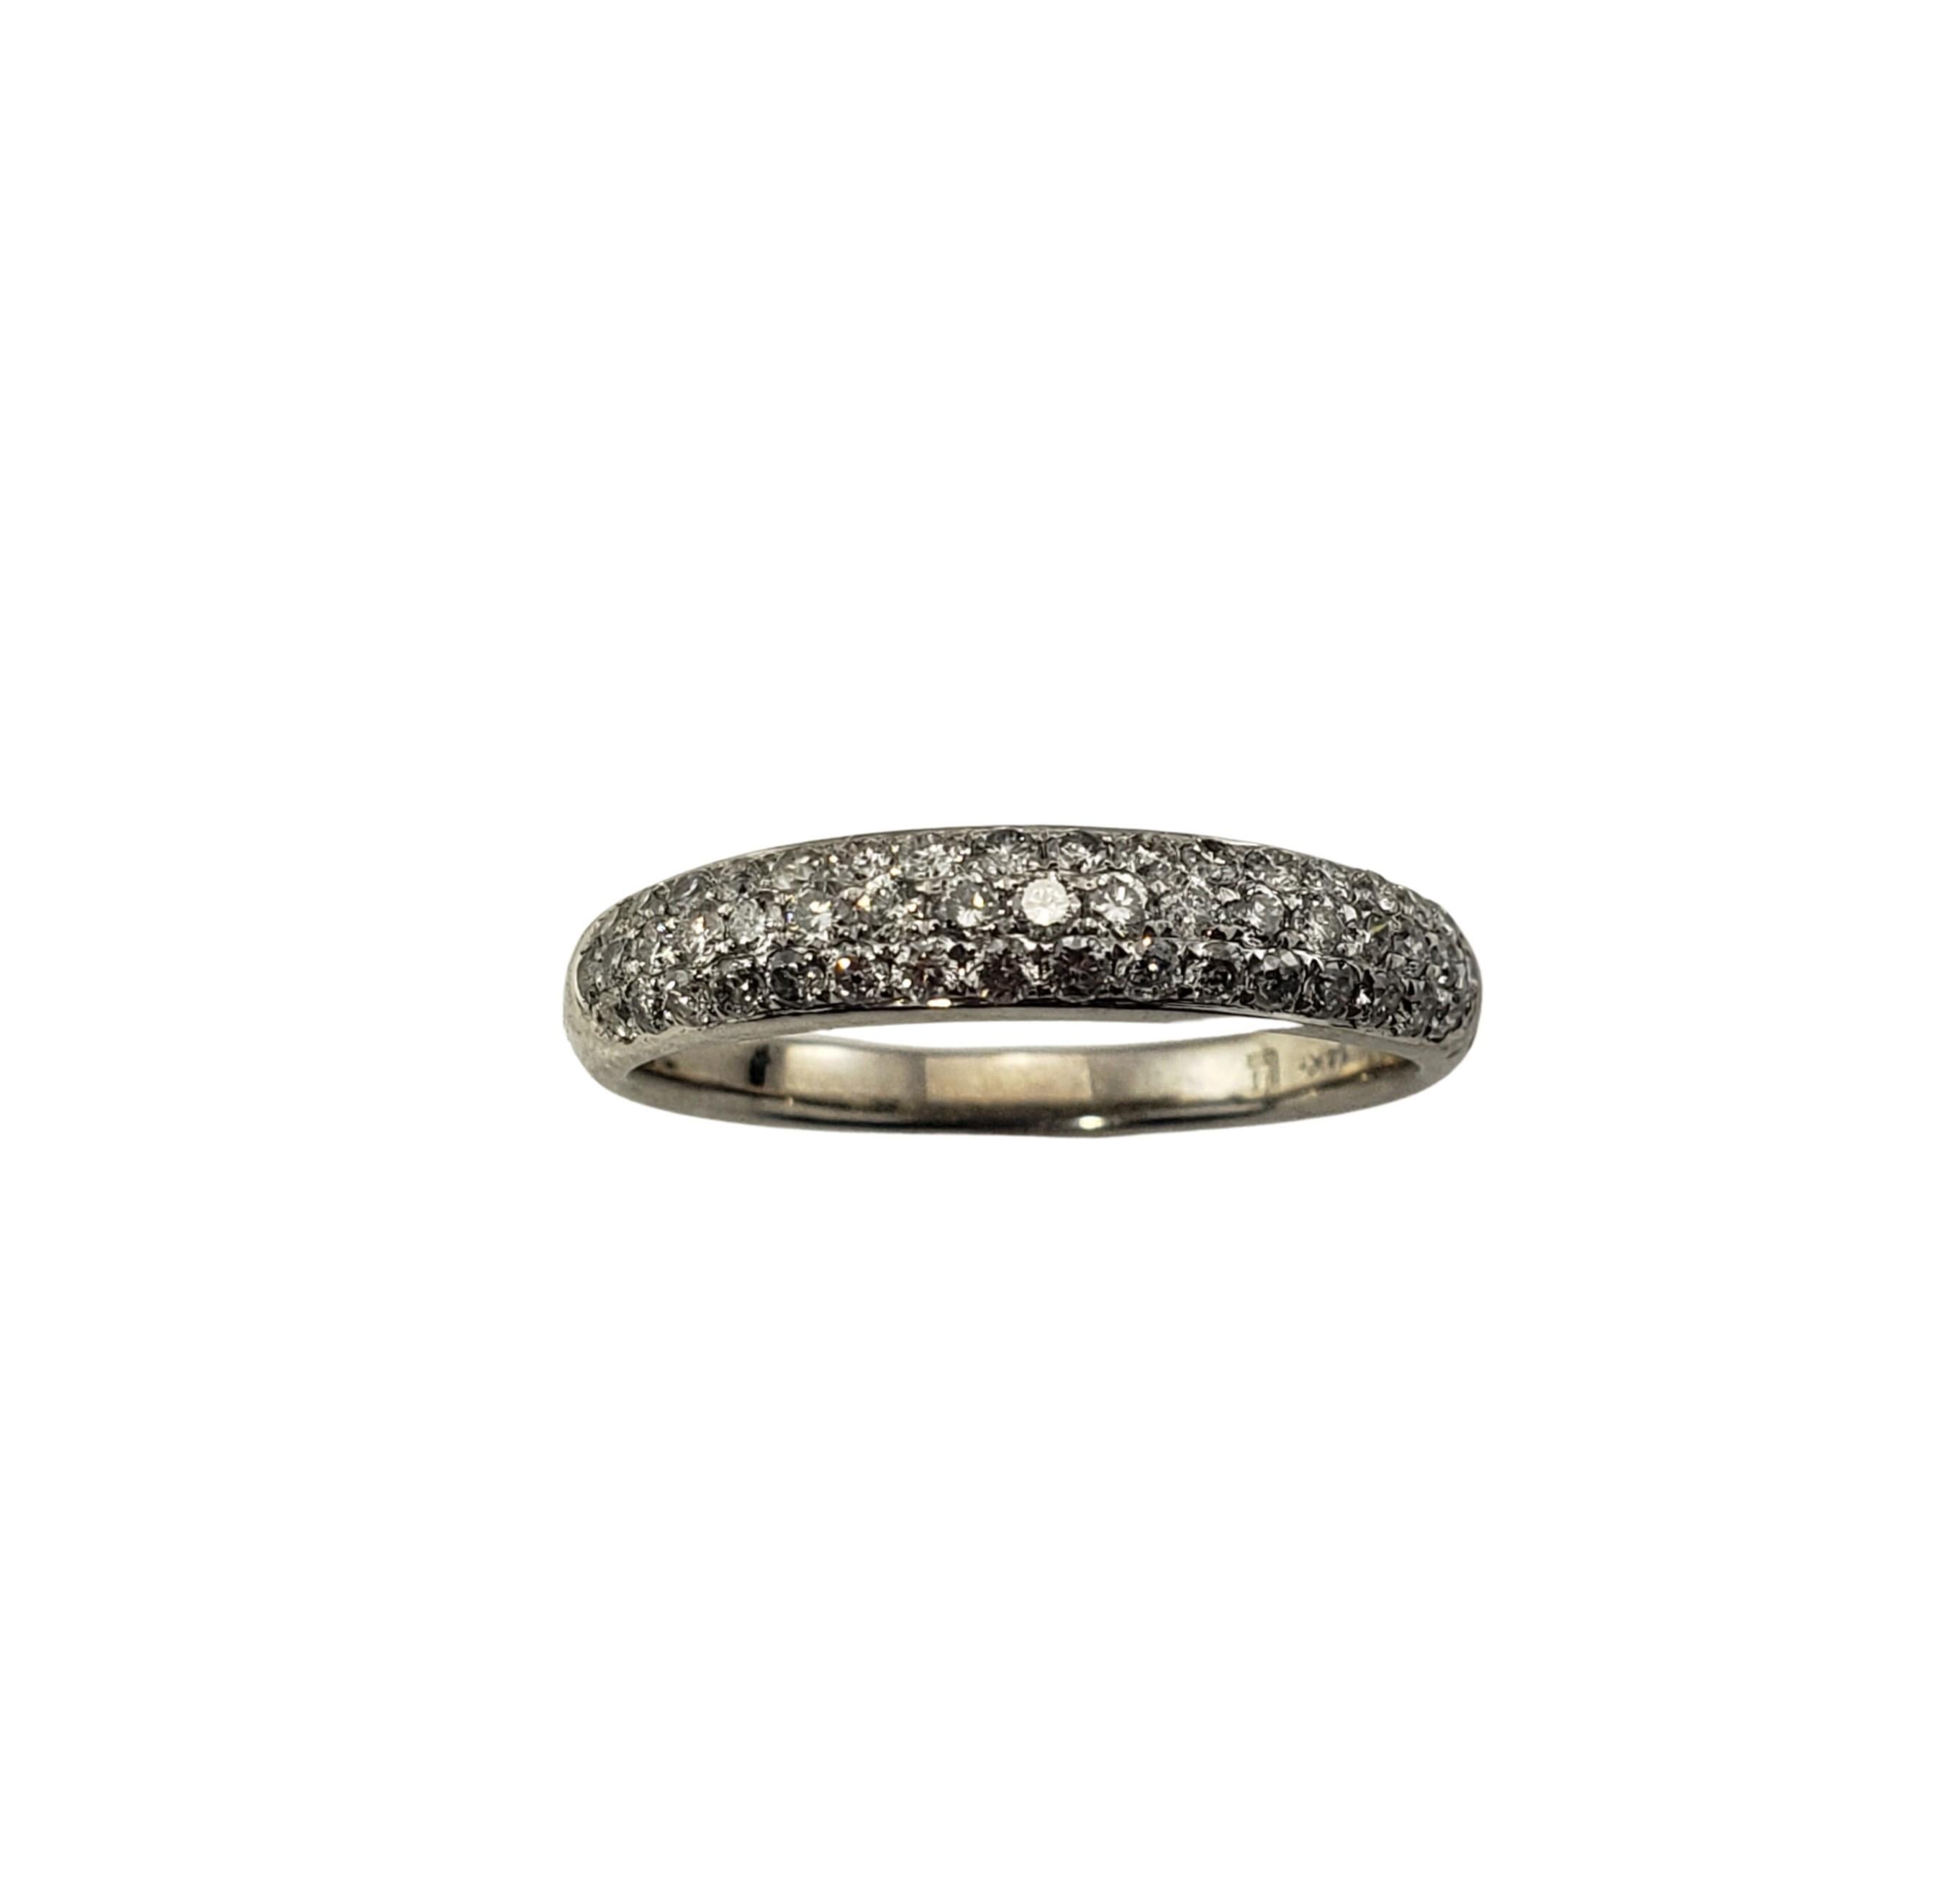 Vintage 14 Karat White Gold and Diamond Wedding Band Ring Size 6.5-

This sparkling band features 49 round brilliant cut diamonds set in beautifully detailed 14K white gold.  Width:  4 mm.  Shank: 2 mm.

Approximate total diamond weight:  .50